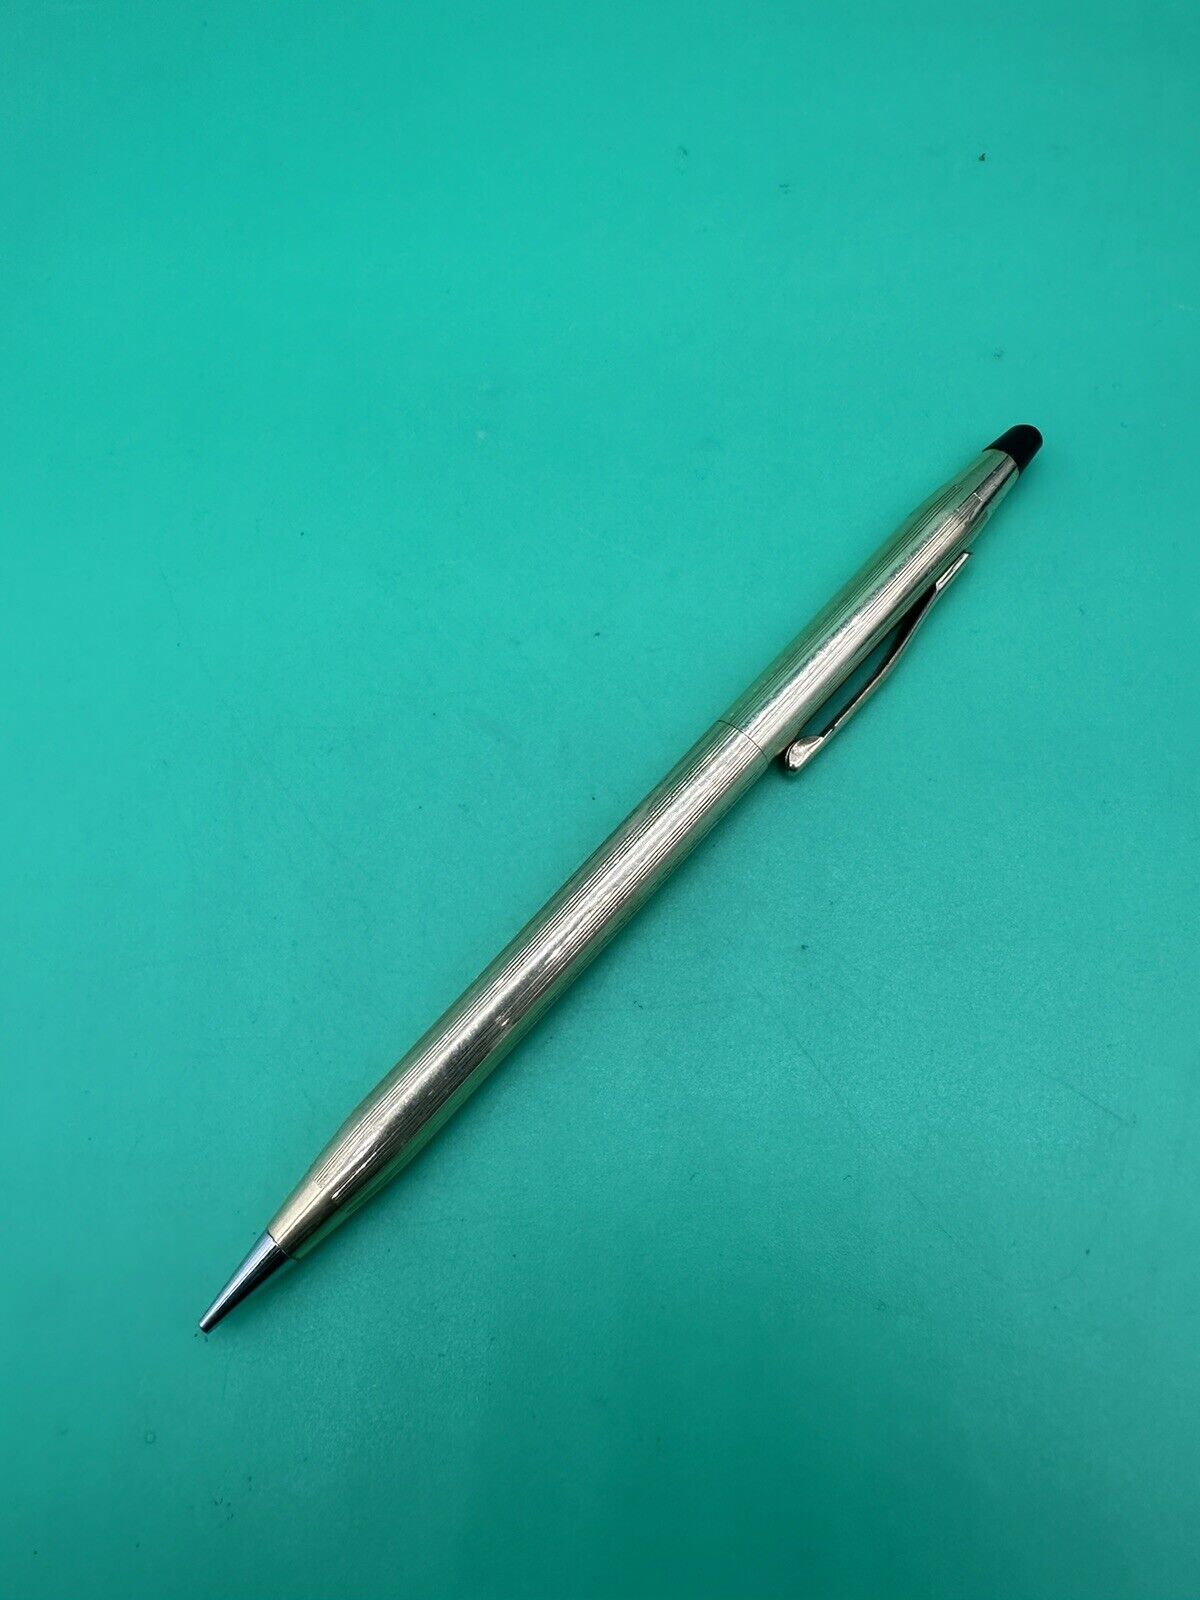 Vintage Cross 1/20 12k Gold Filled Mechanical Pencil Made In USA